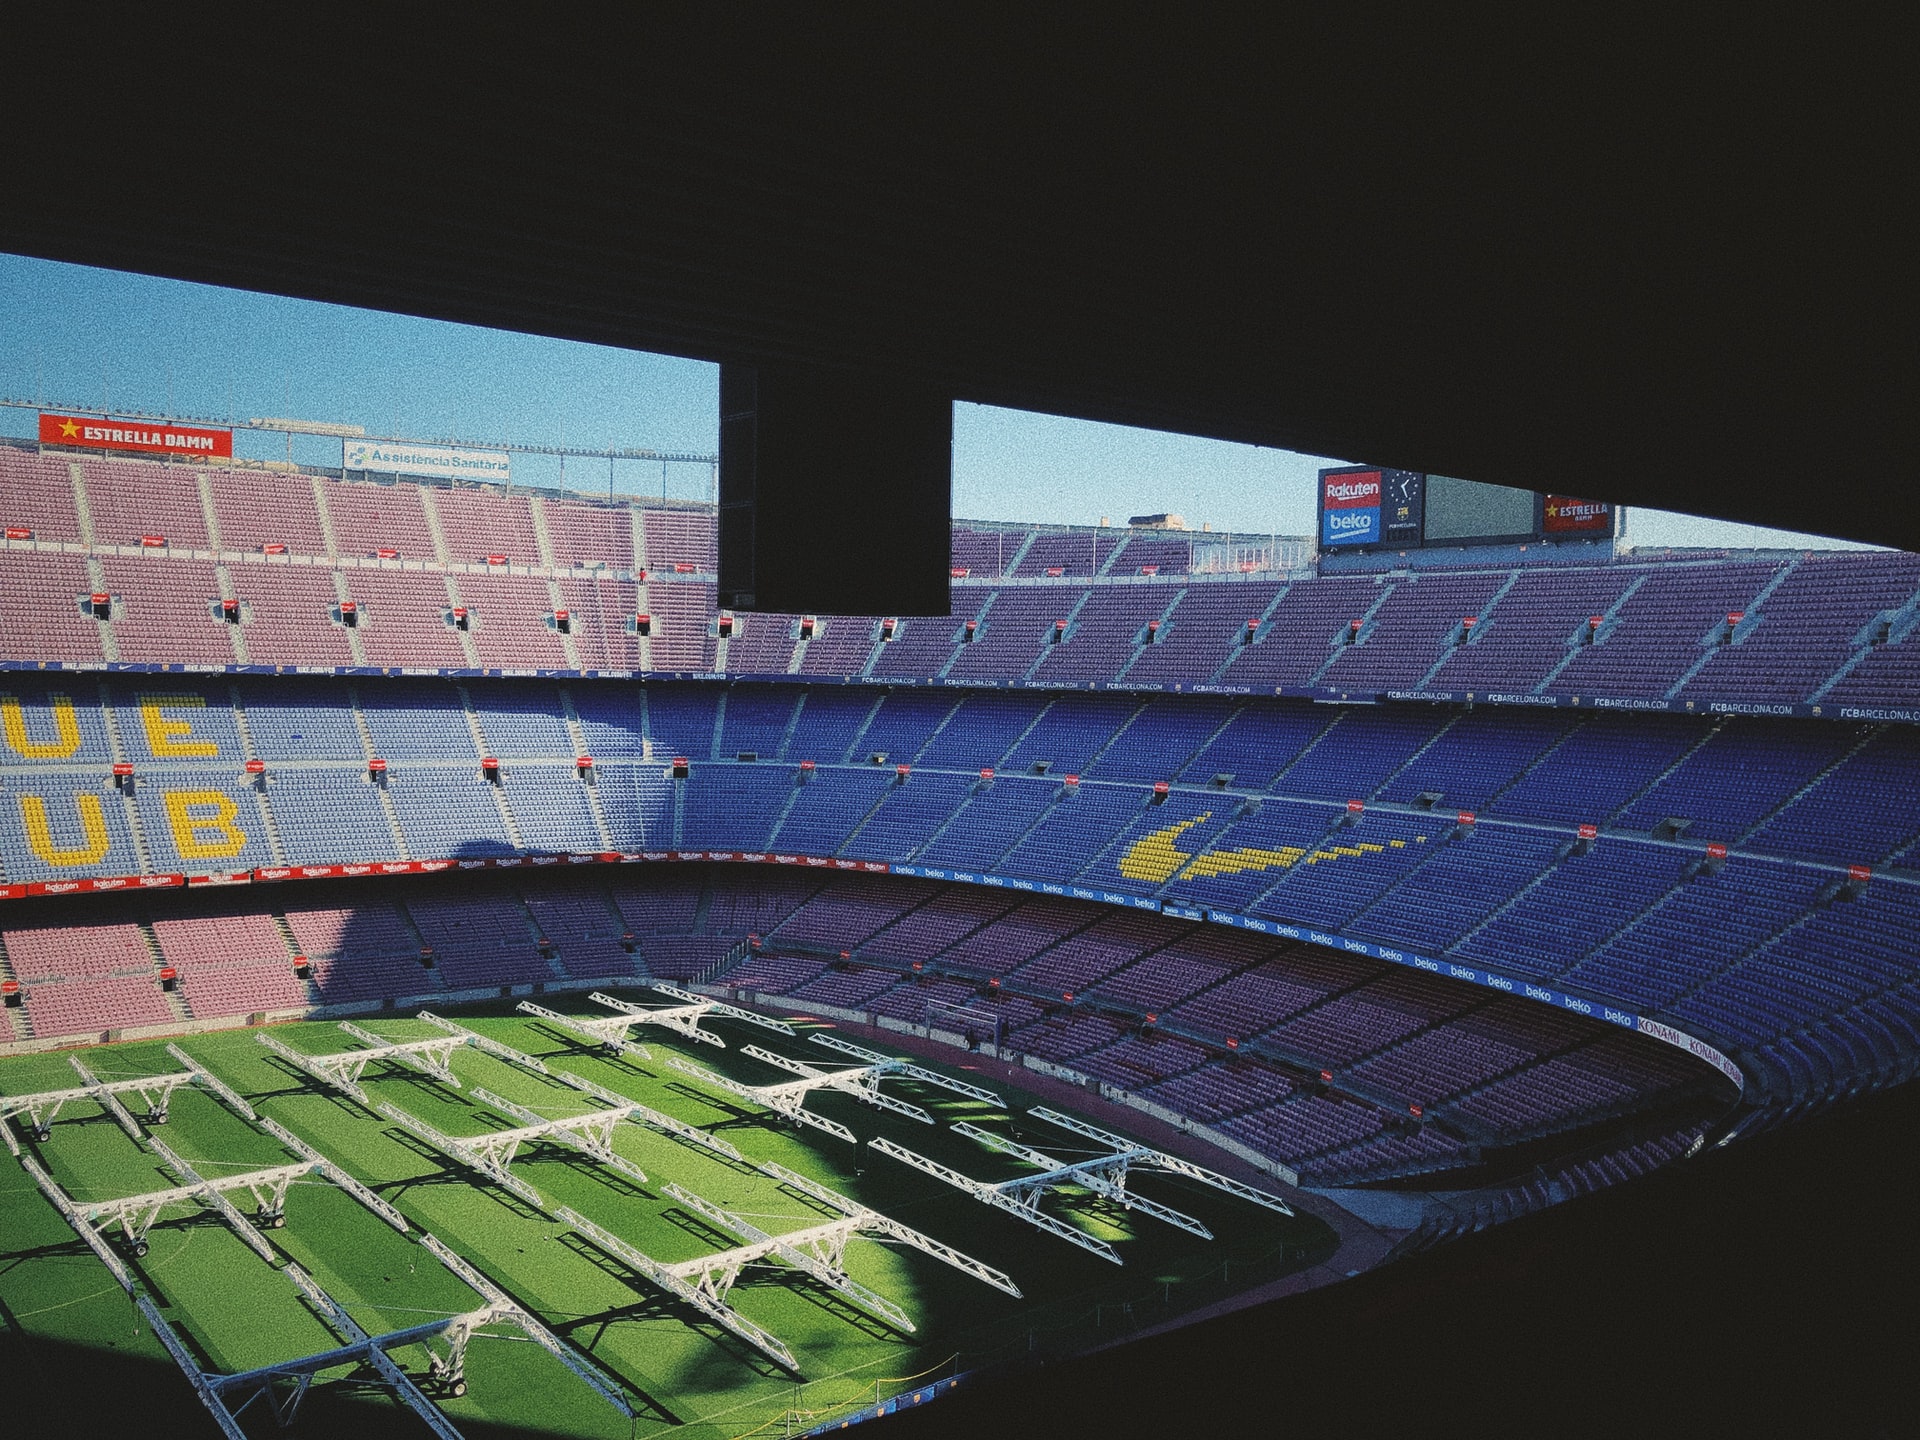 Home to Camp Nou, Les Corts is a favourite destination for football fans travelling to Barcelona for a Barça match